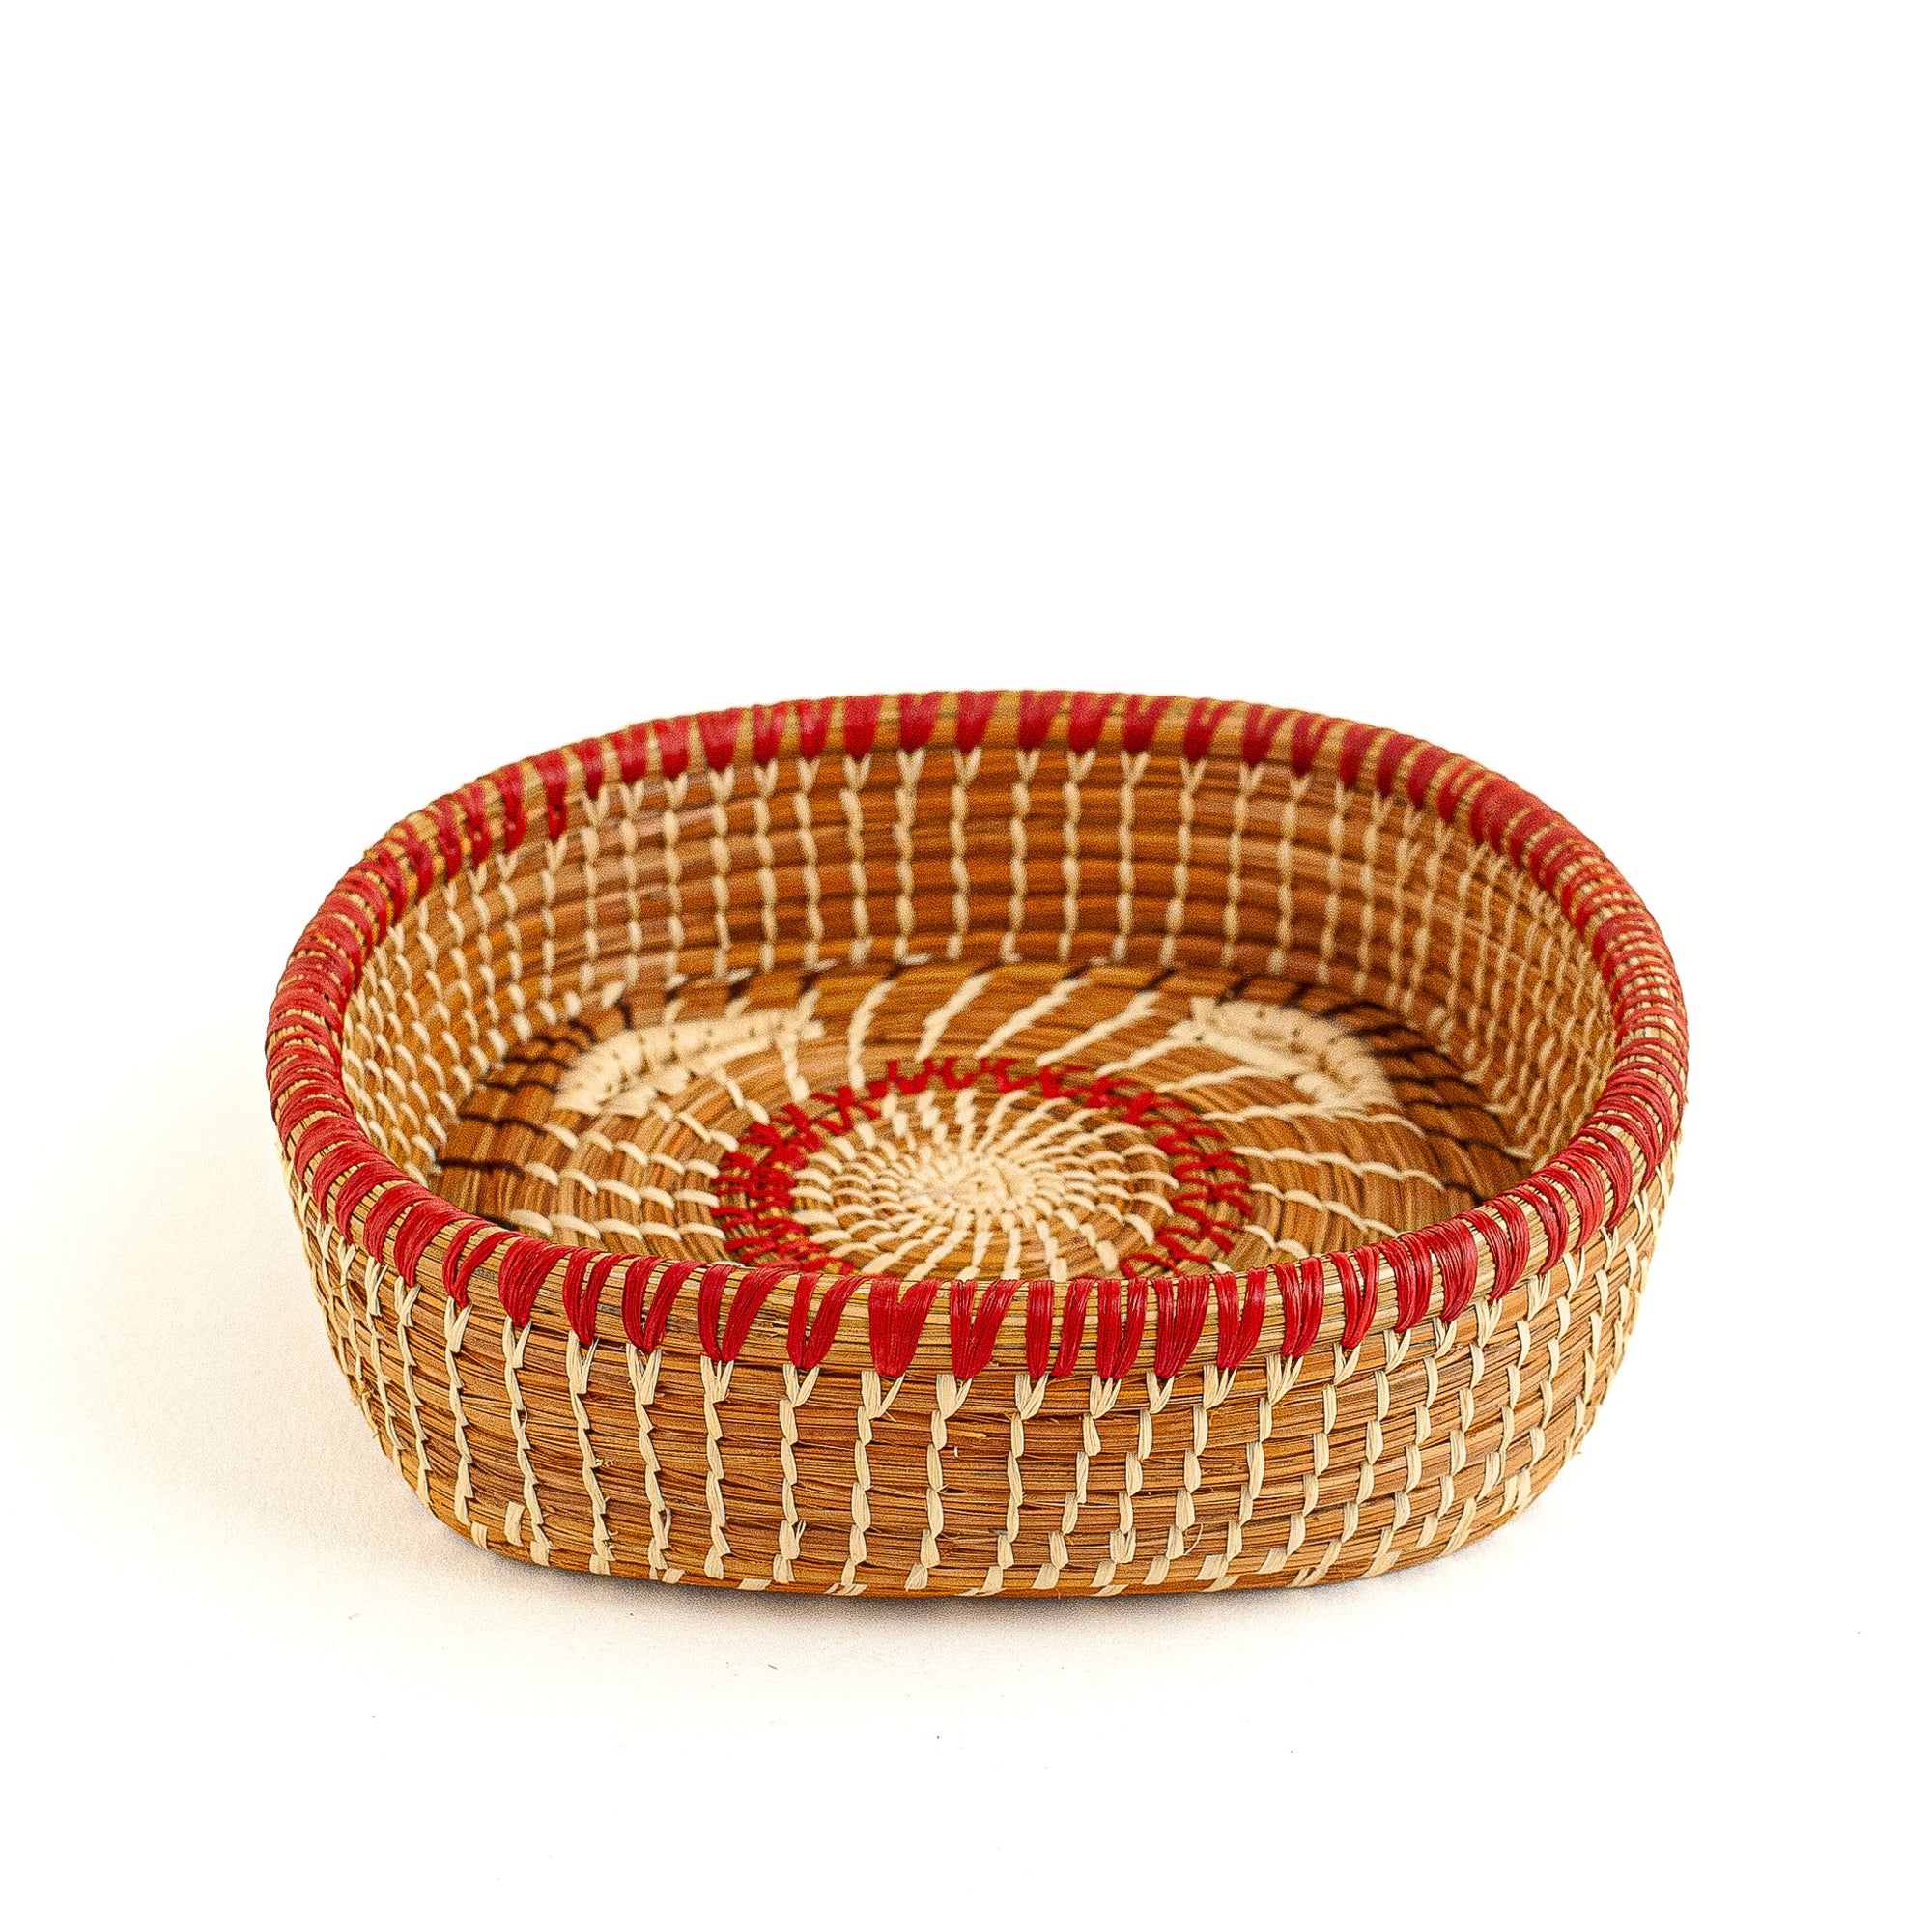 pine needle basket with red and brown accents